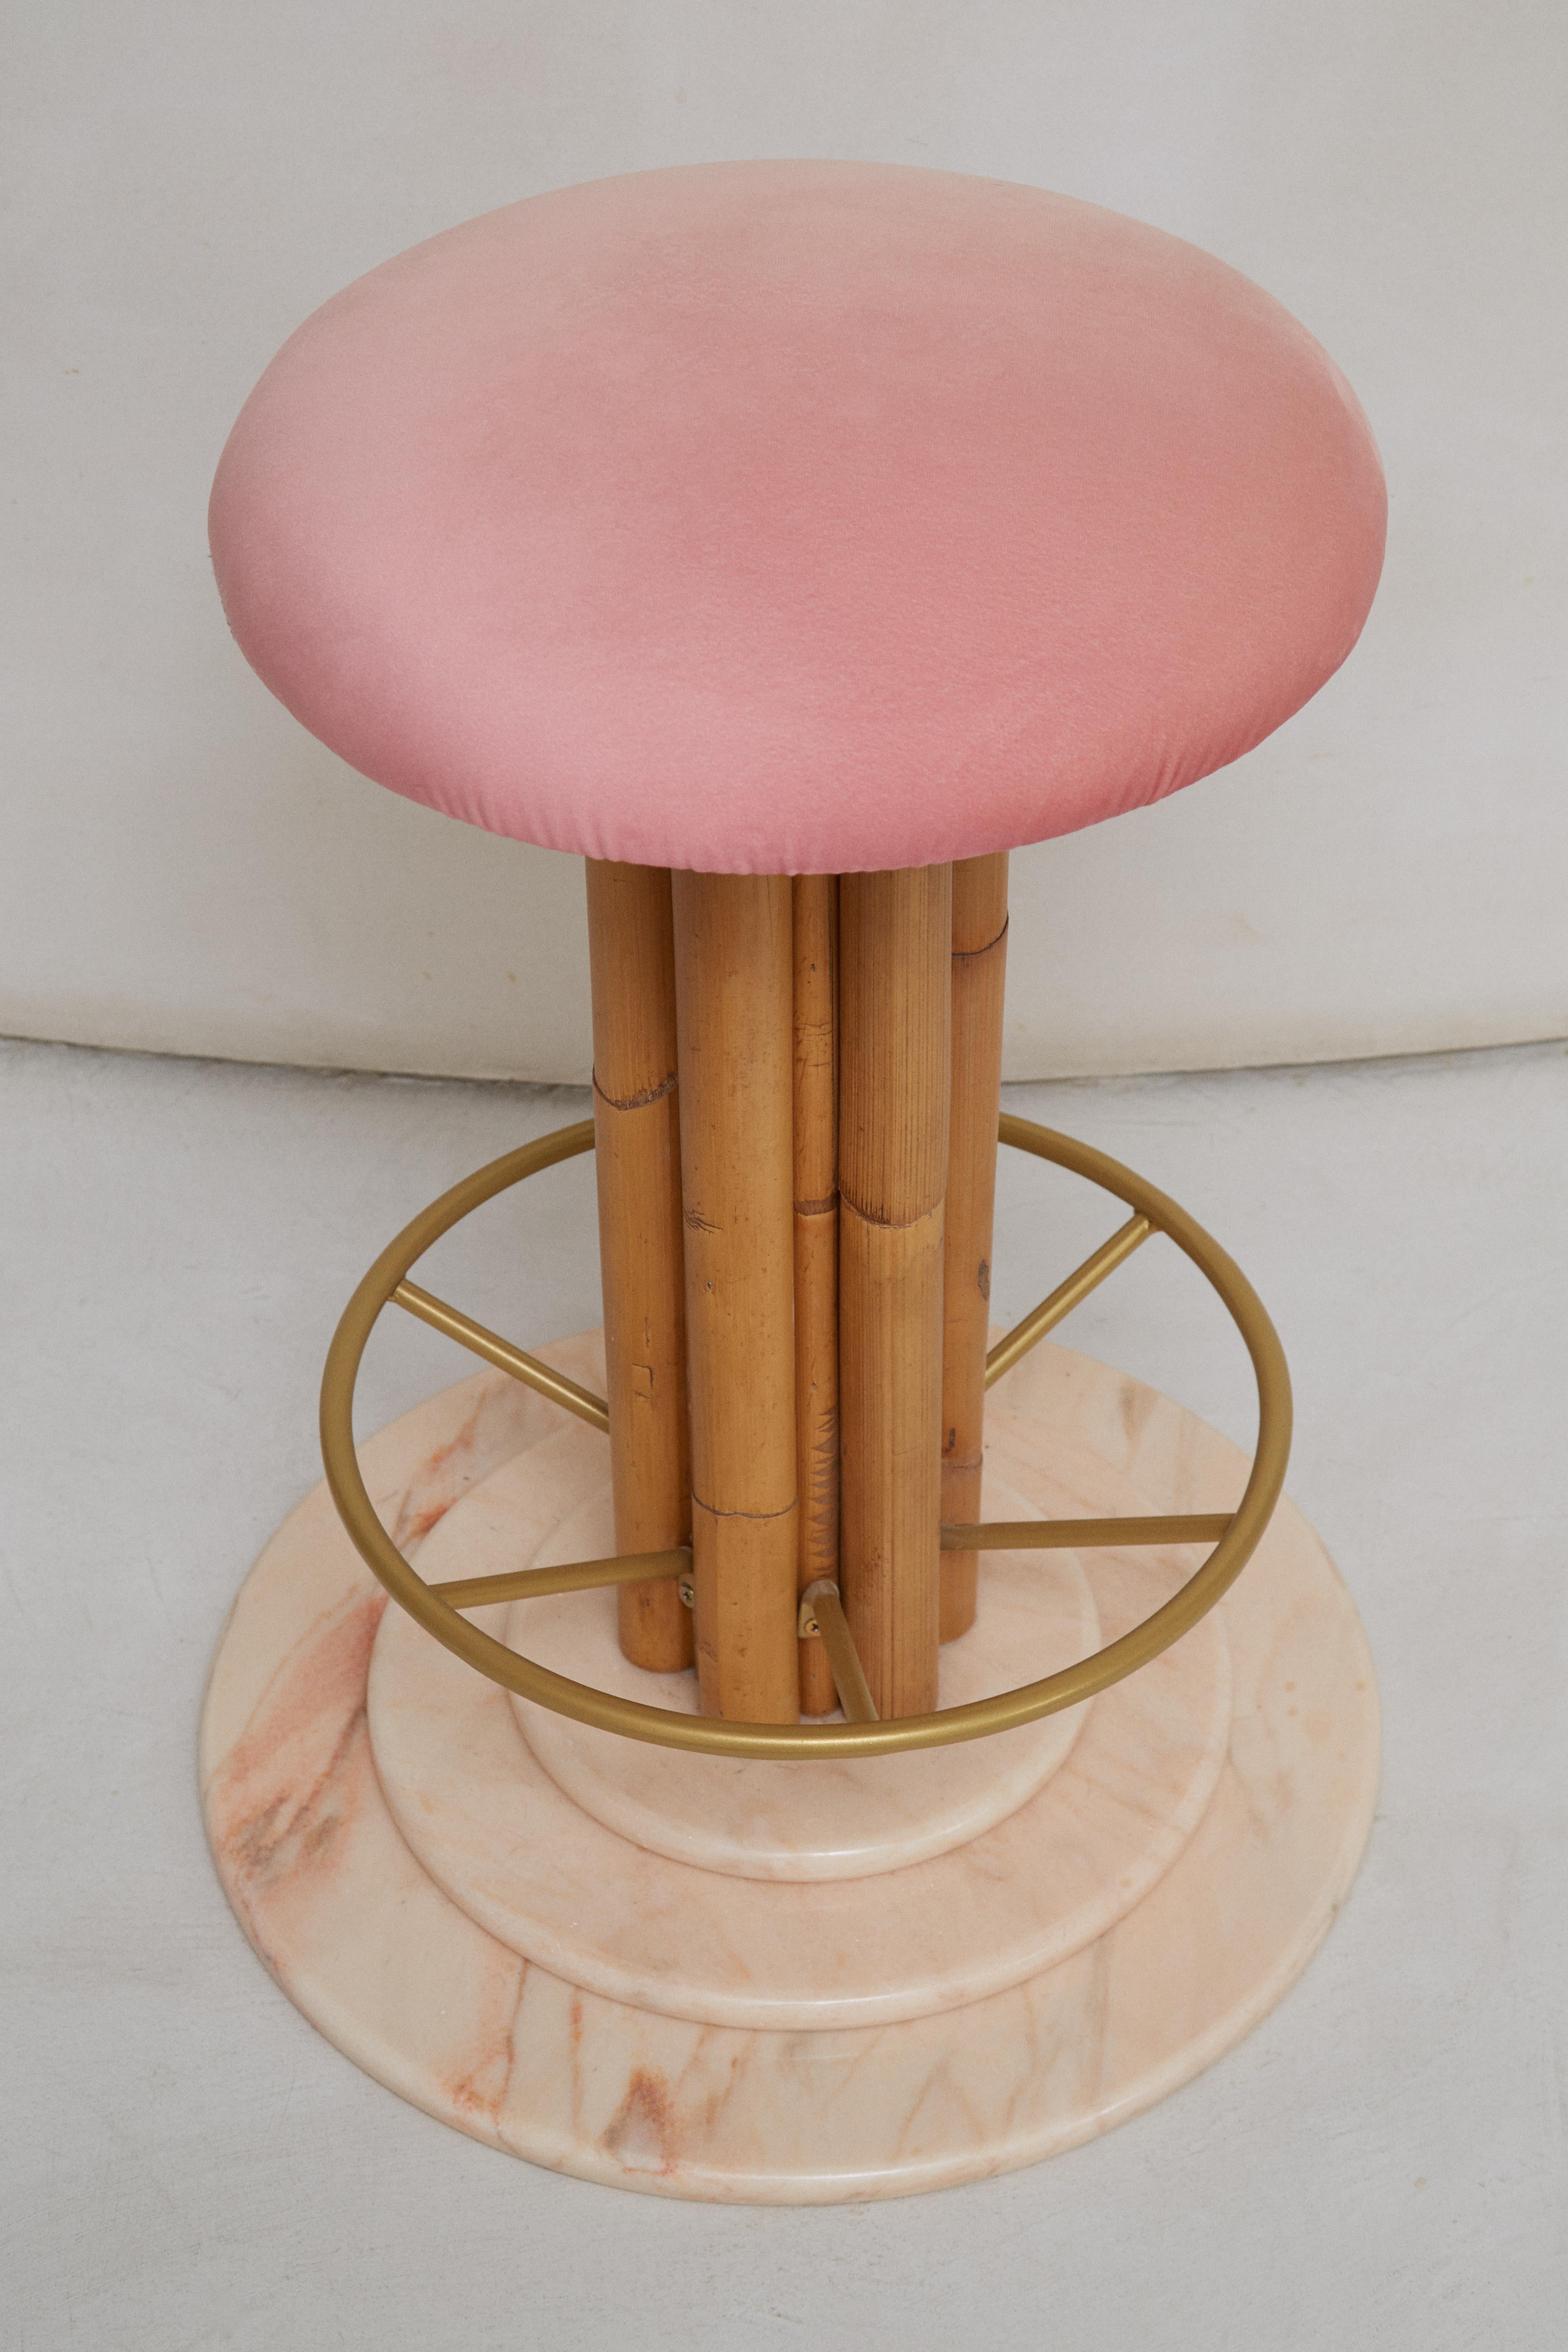 Other Peaches Stool by Patricia Bustos de la Torre For Sale